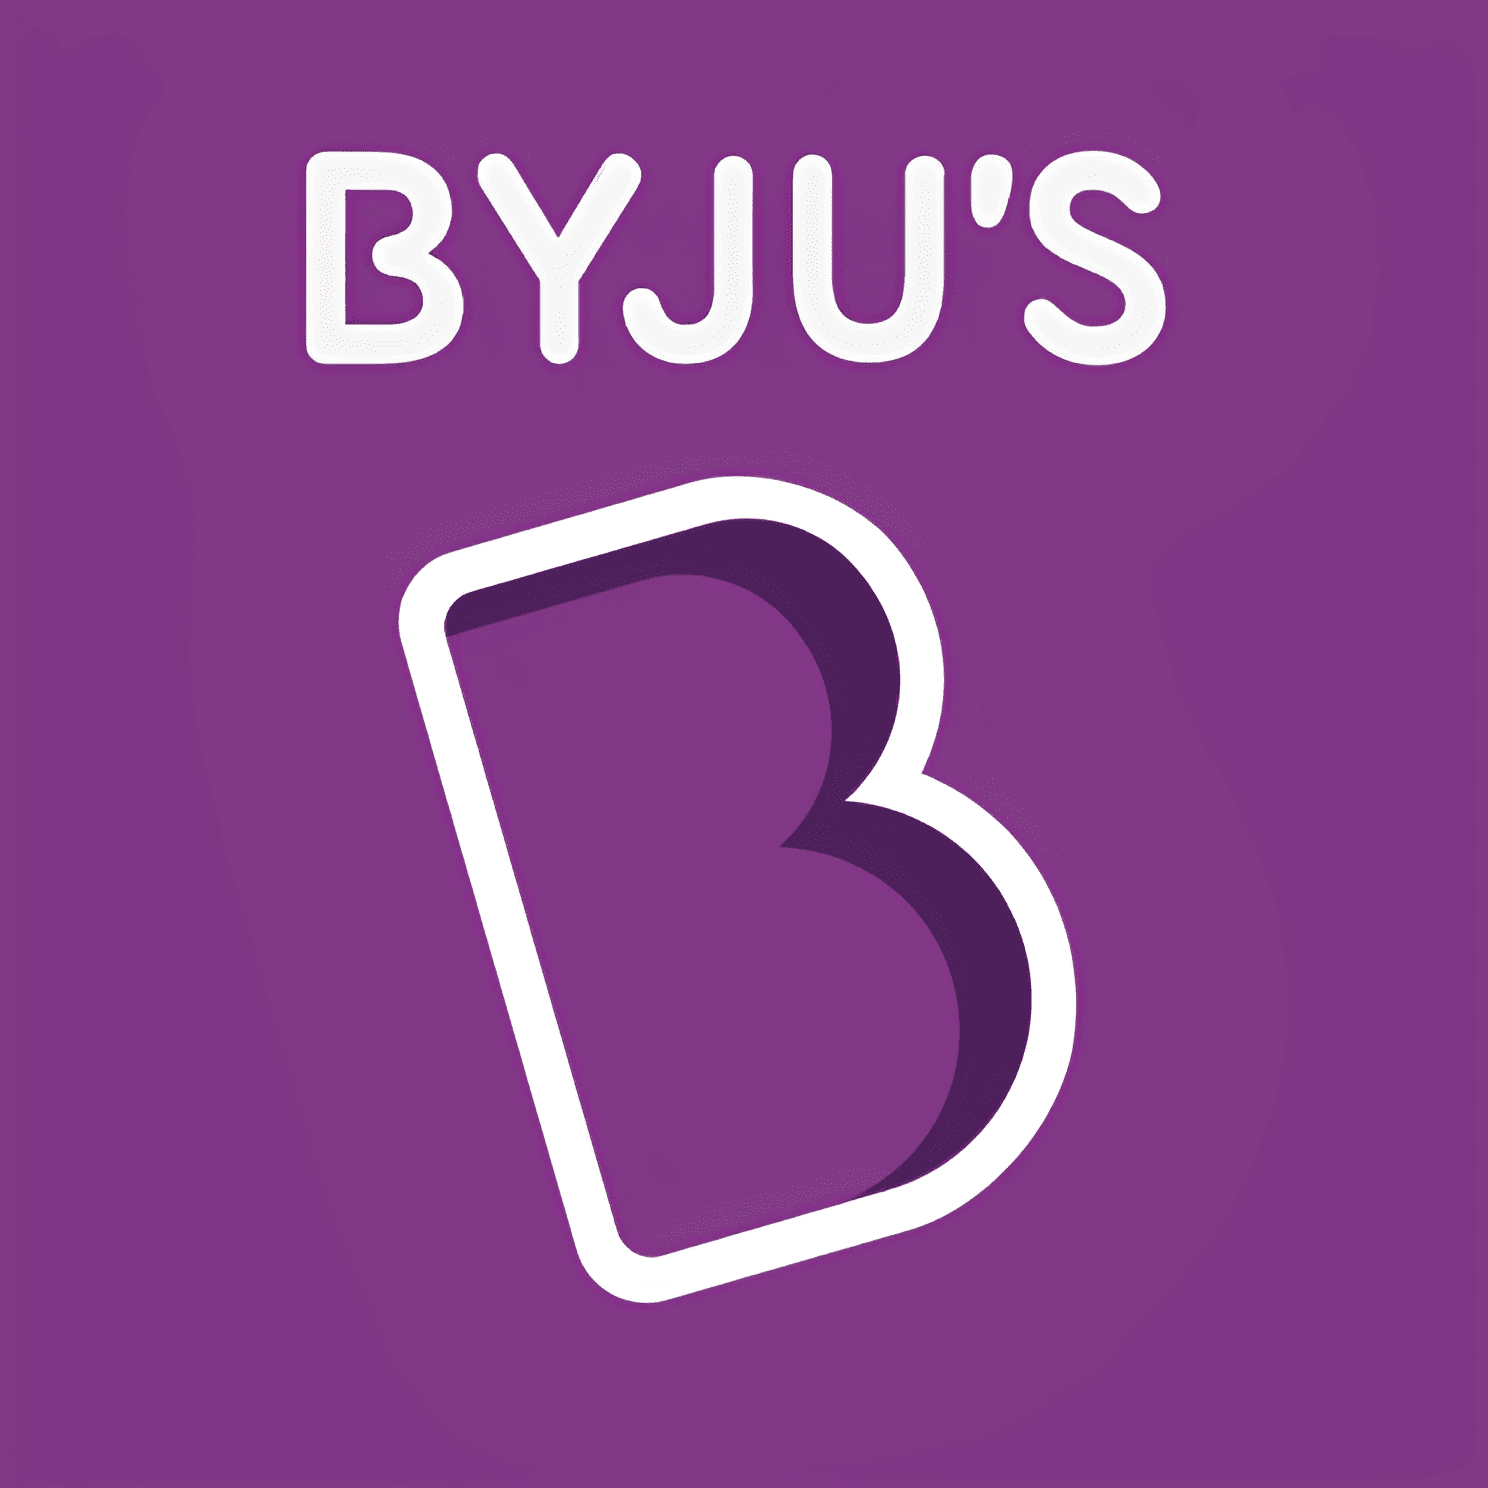 India's Byju's lost more than $20 billion in valuation — what went wrong?